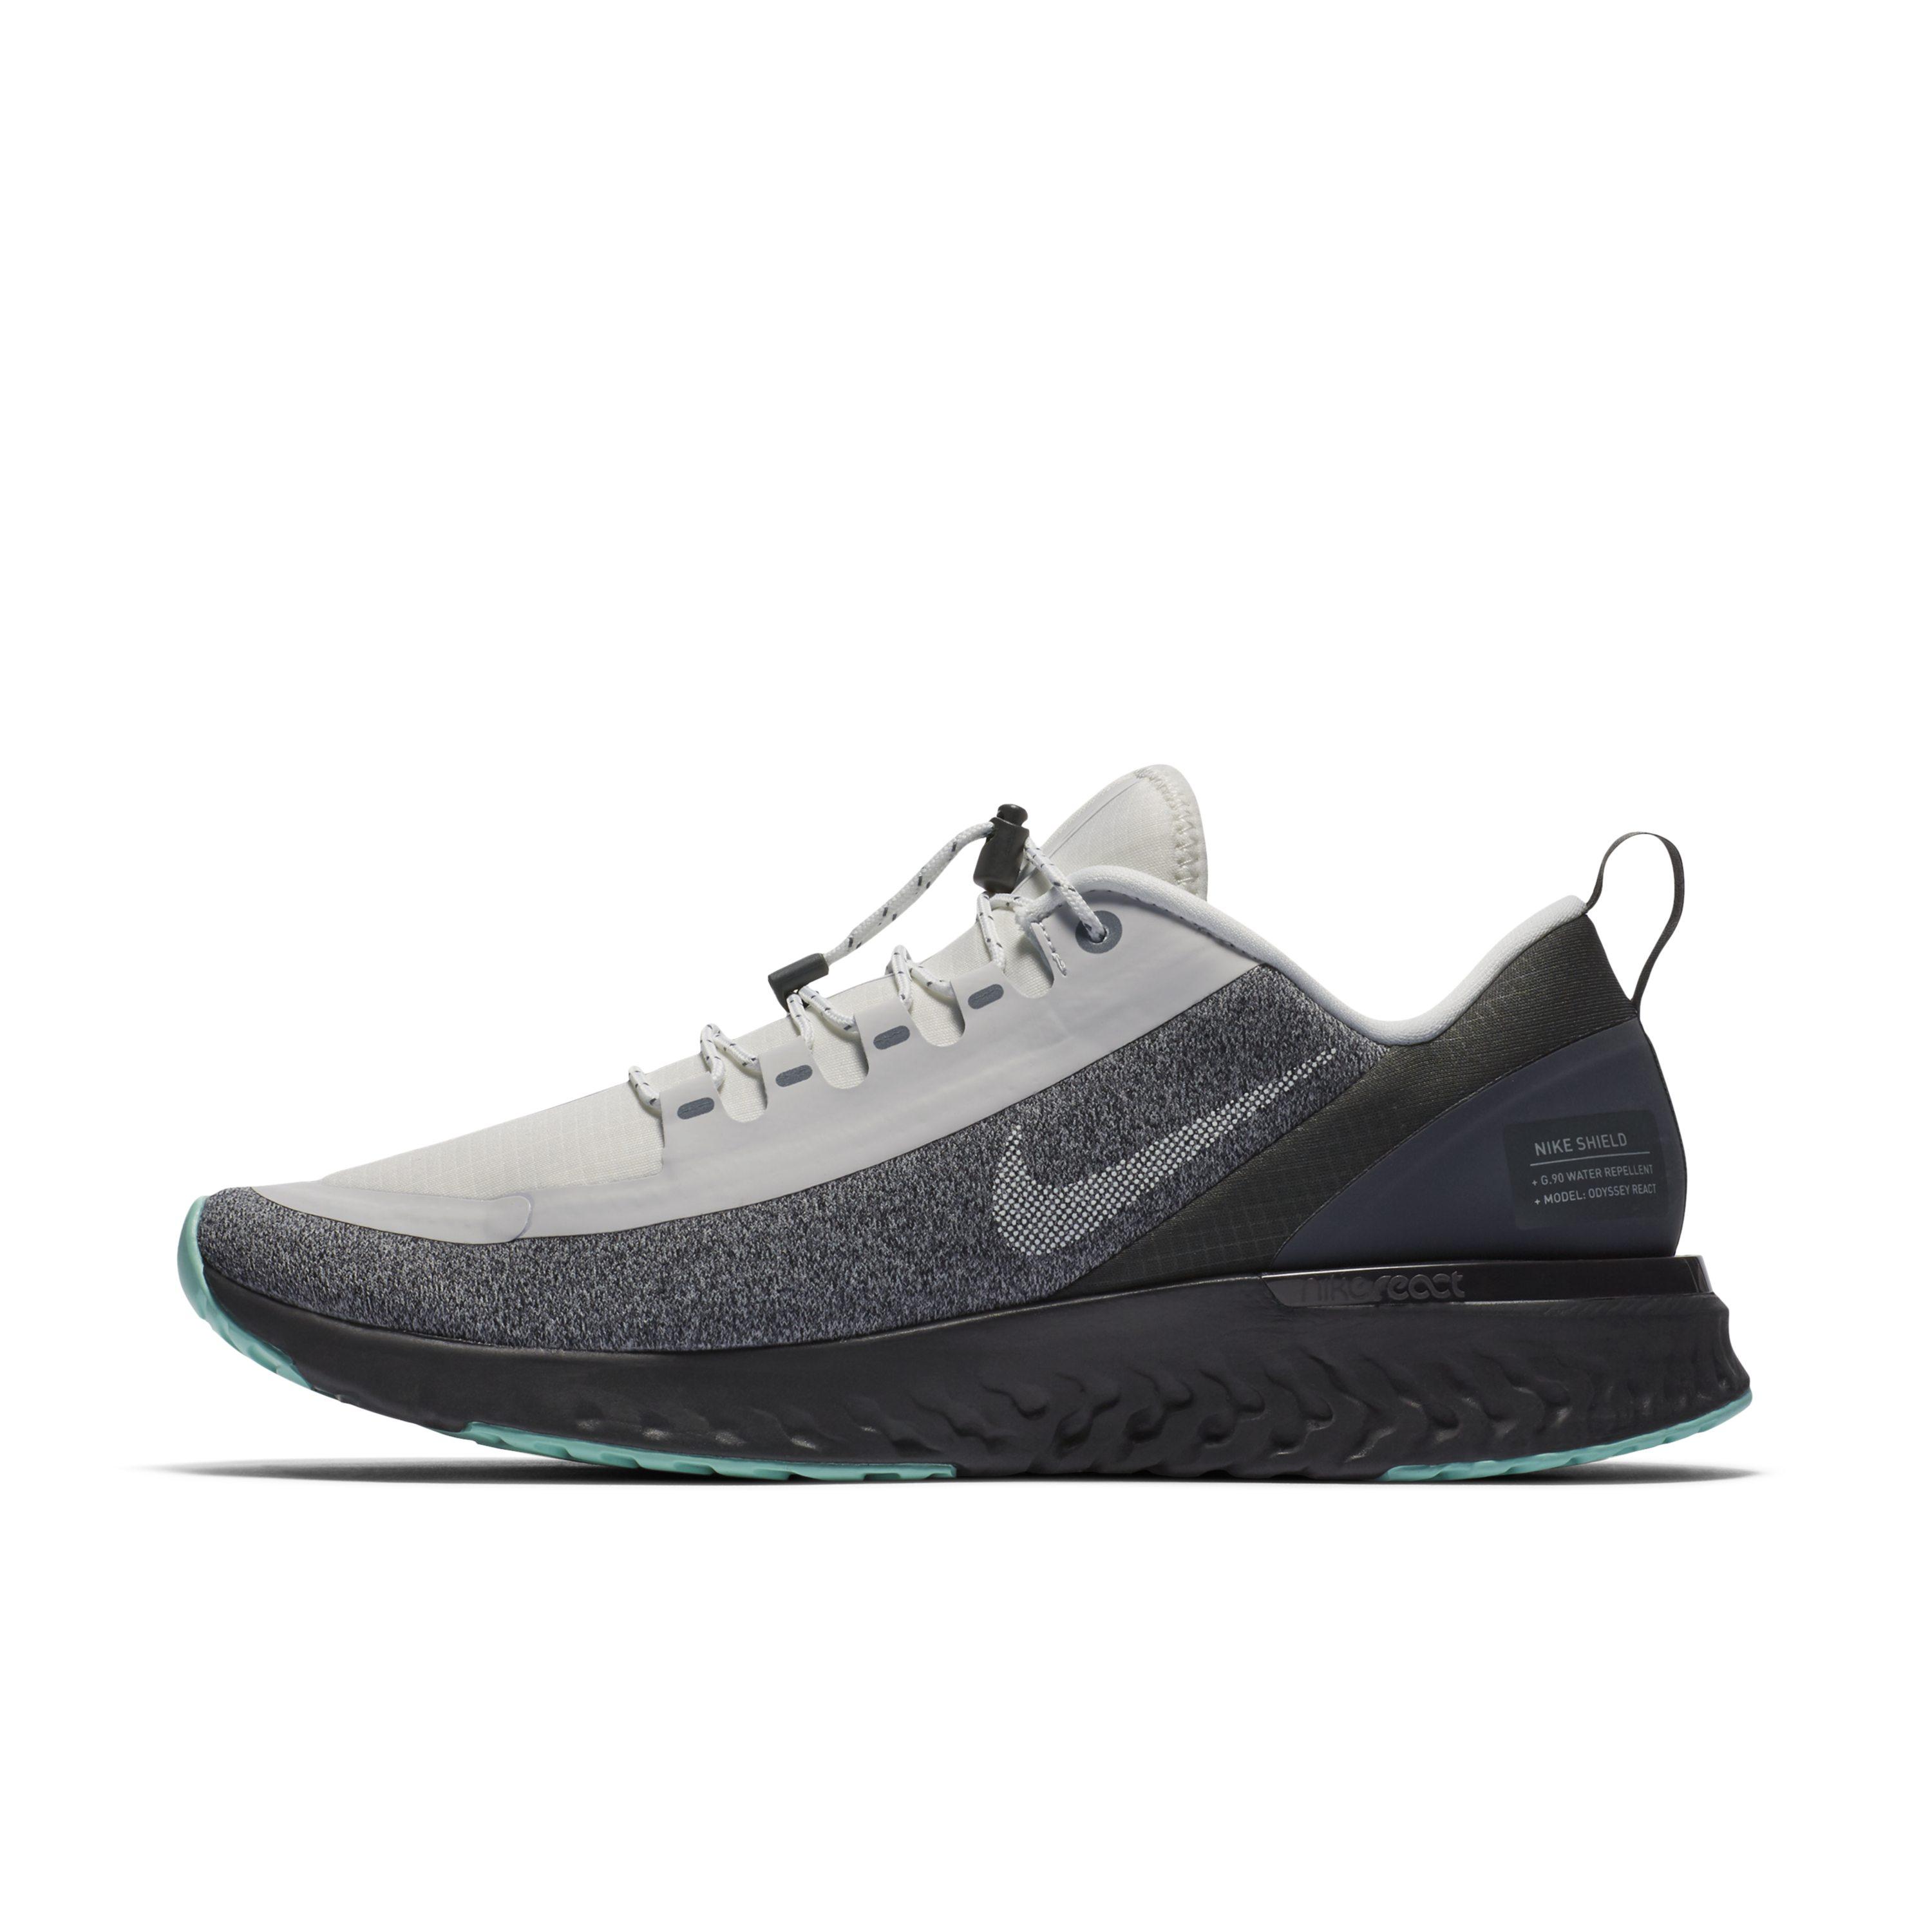 Nike Odyssey React Shield Water-repellent Running Shoe in White | Lyst UK